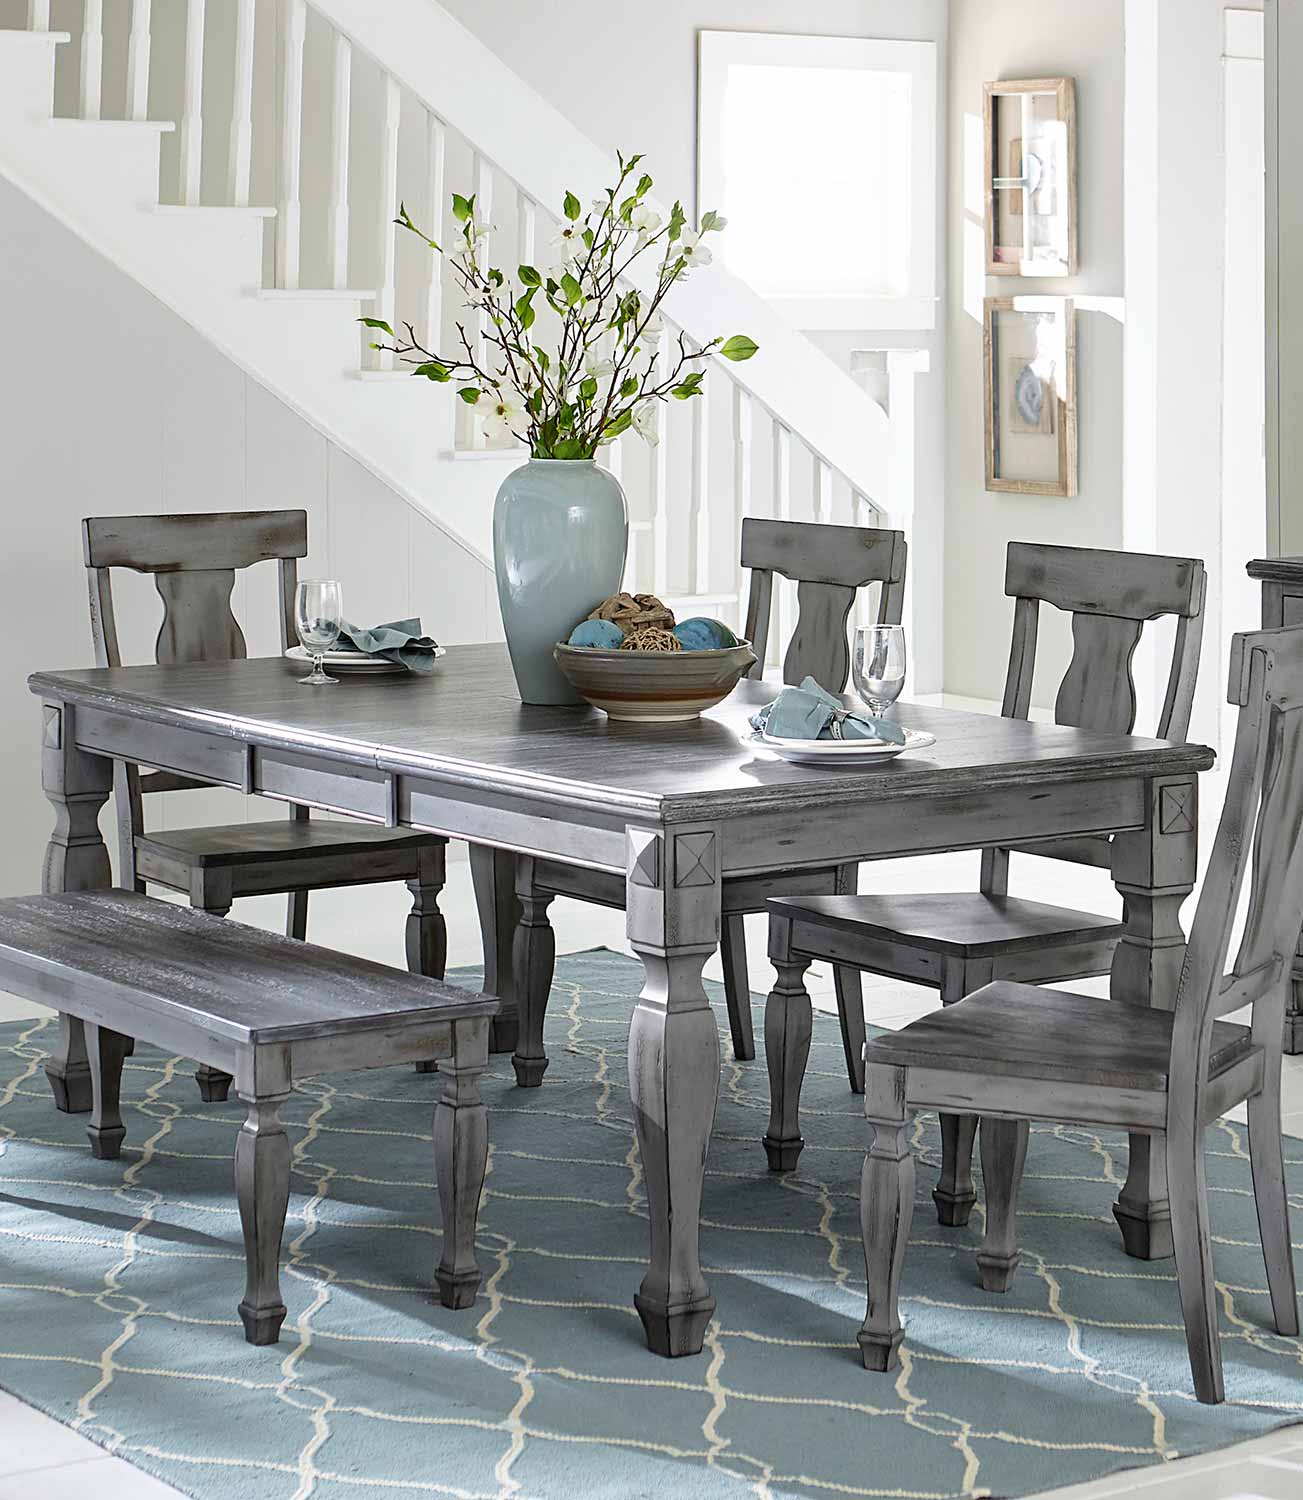 Homelegance Fulbright Rectangular Dining Table with Butterfly Leaf - Weathered Gray Rub Through Finish